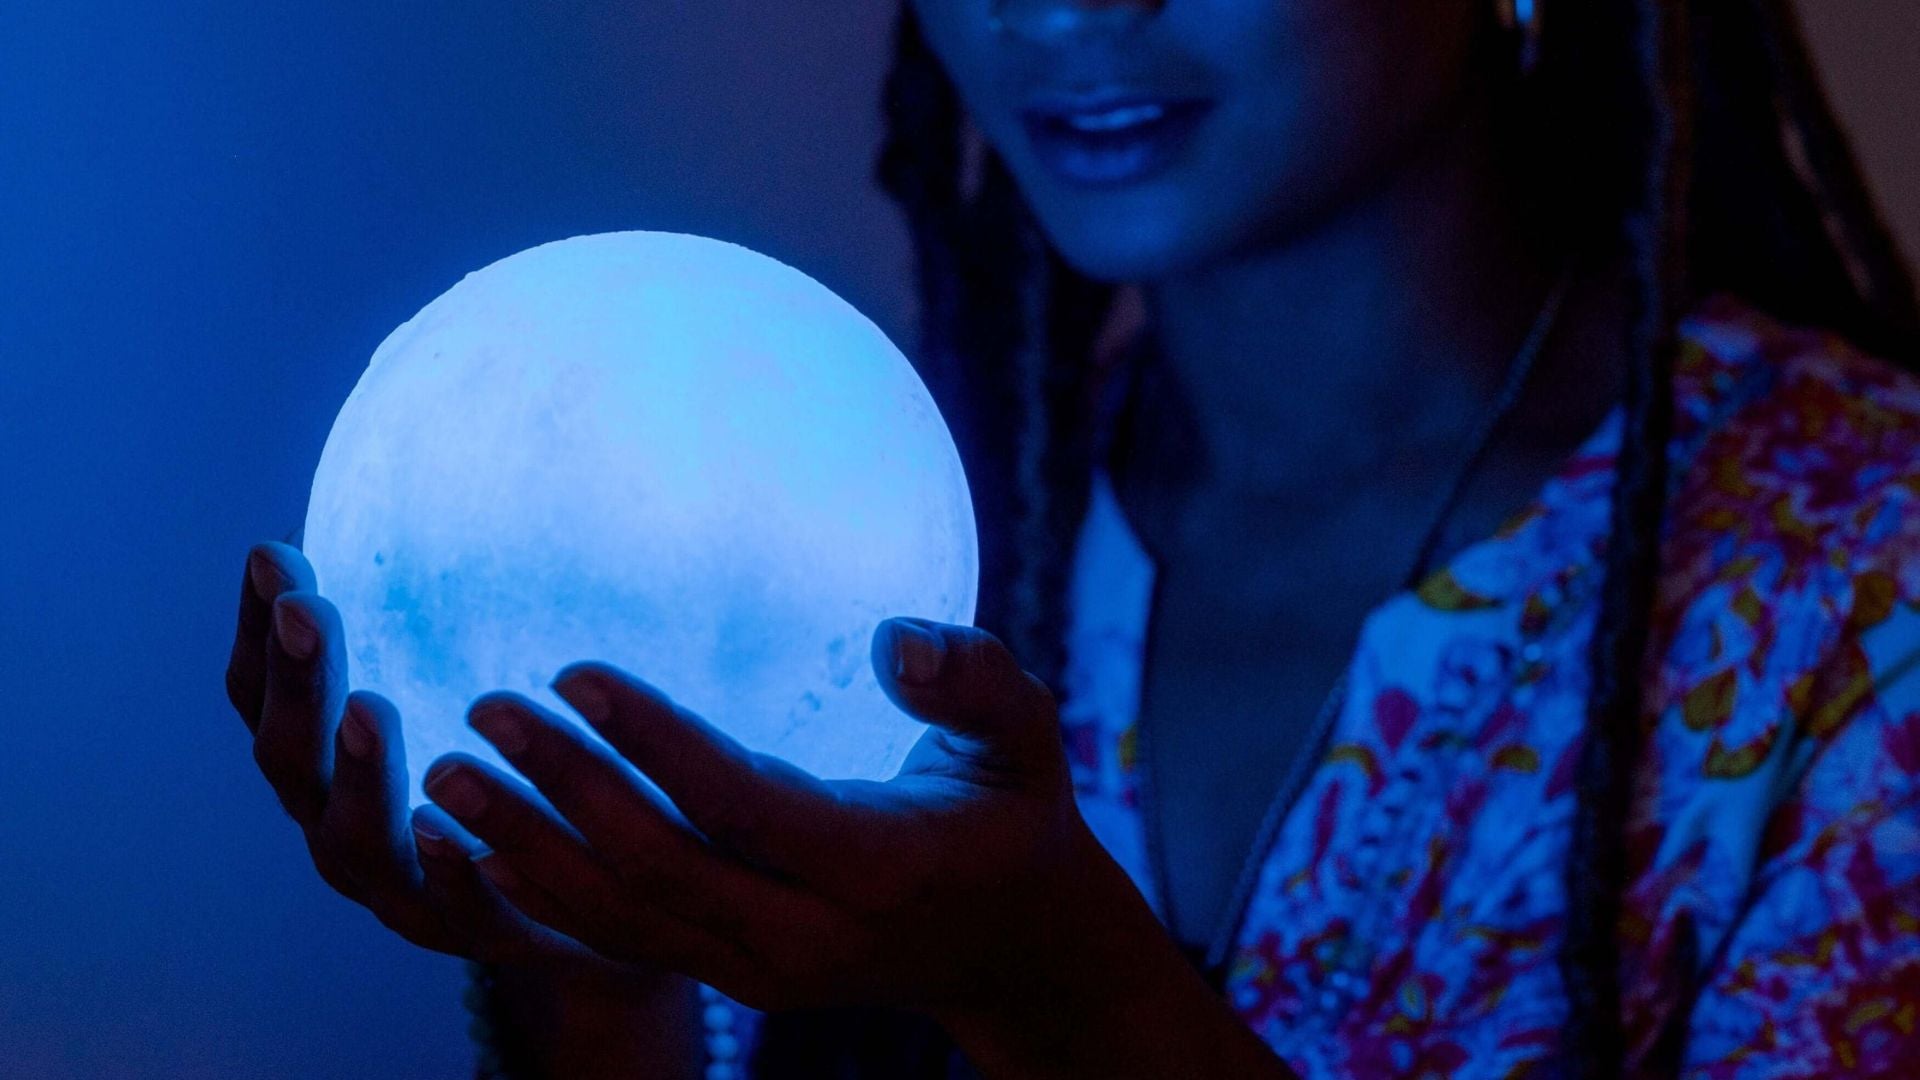 A woman holding a large selenite sphere that looks like the full moon